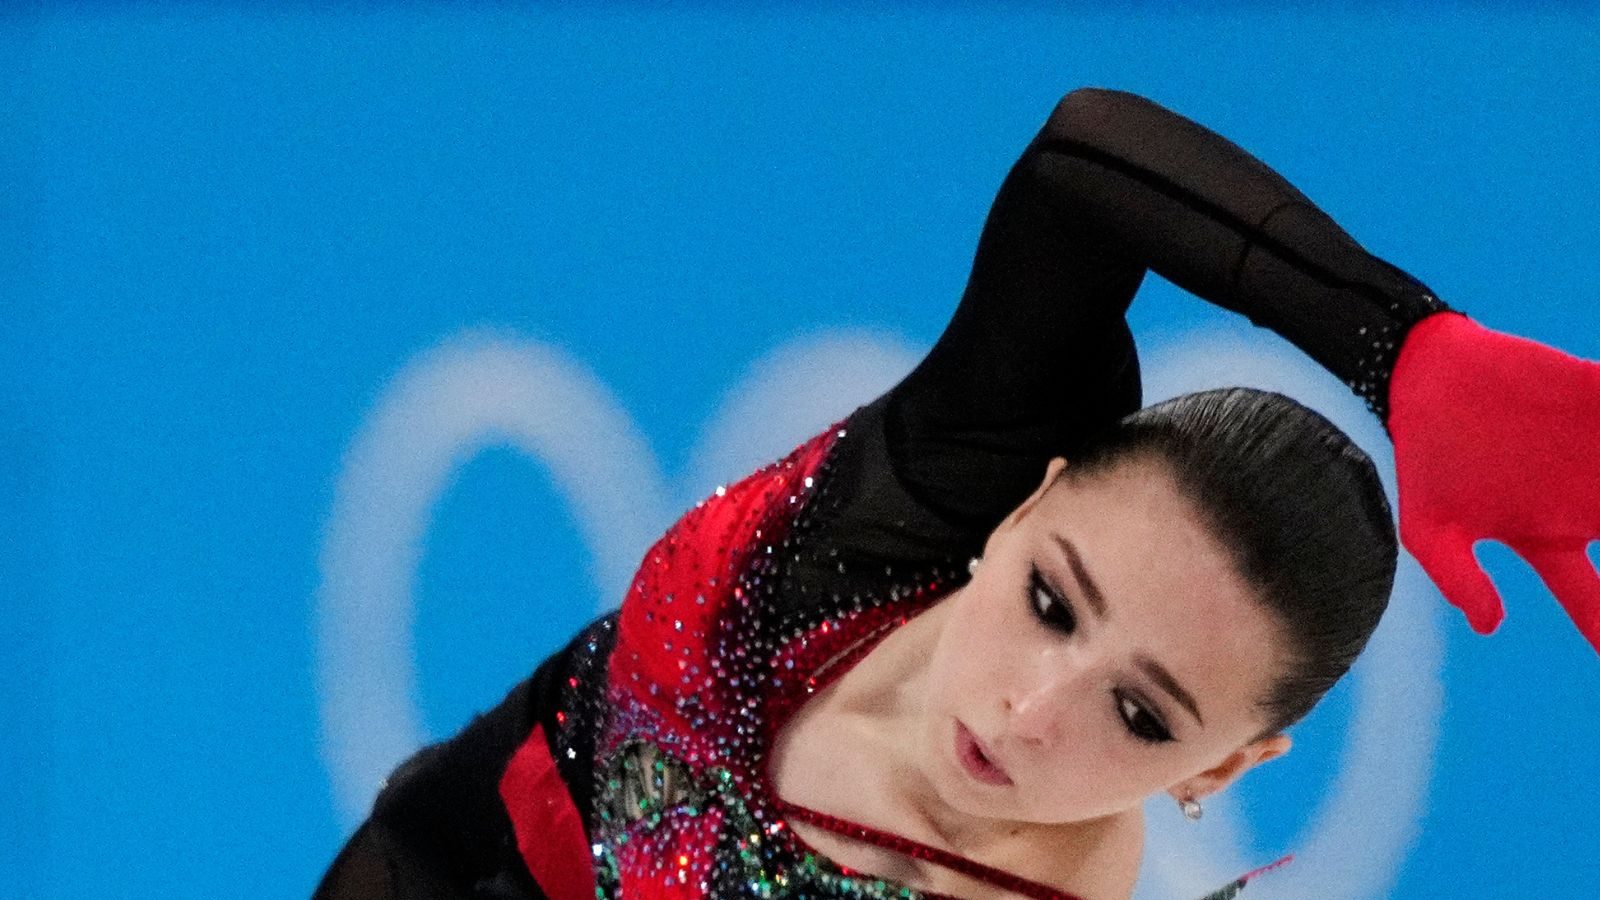 WADA Expresses Concern Over Russia Not Sanctioning Figure Skater Kamila Valieva in Doping Case